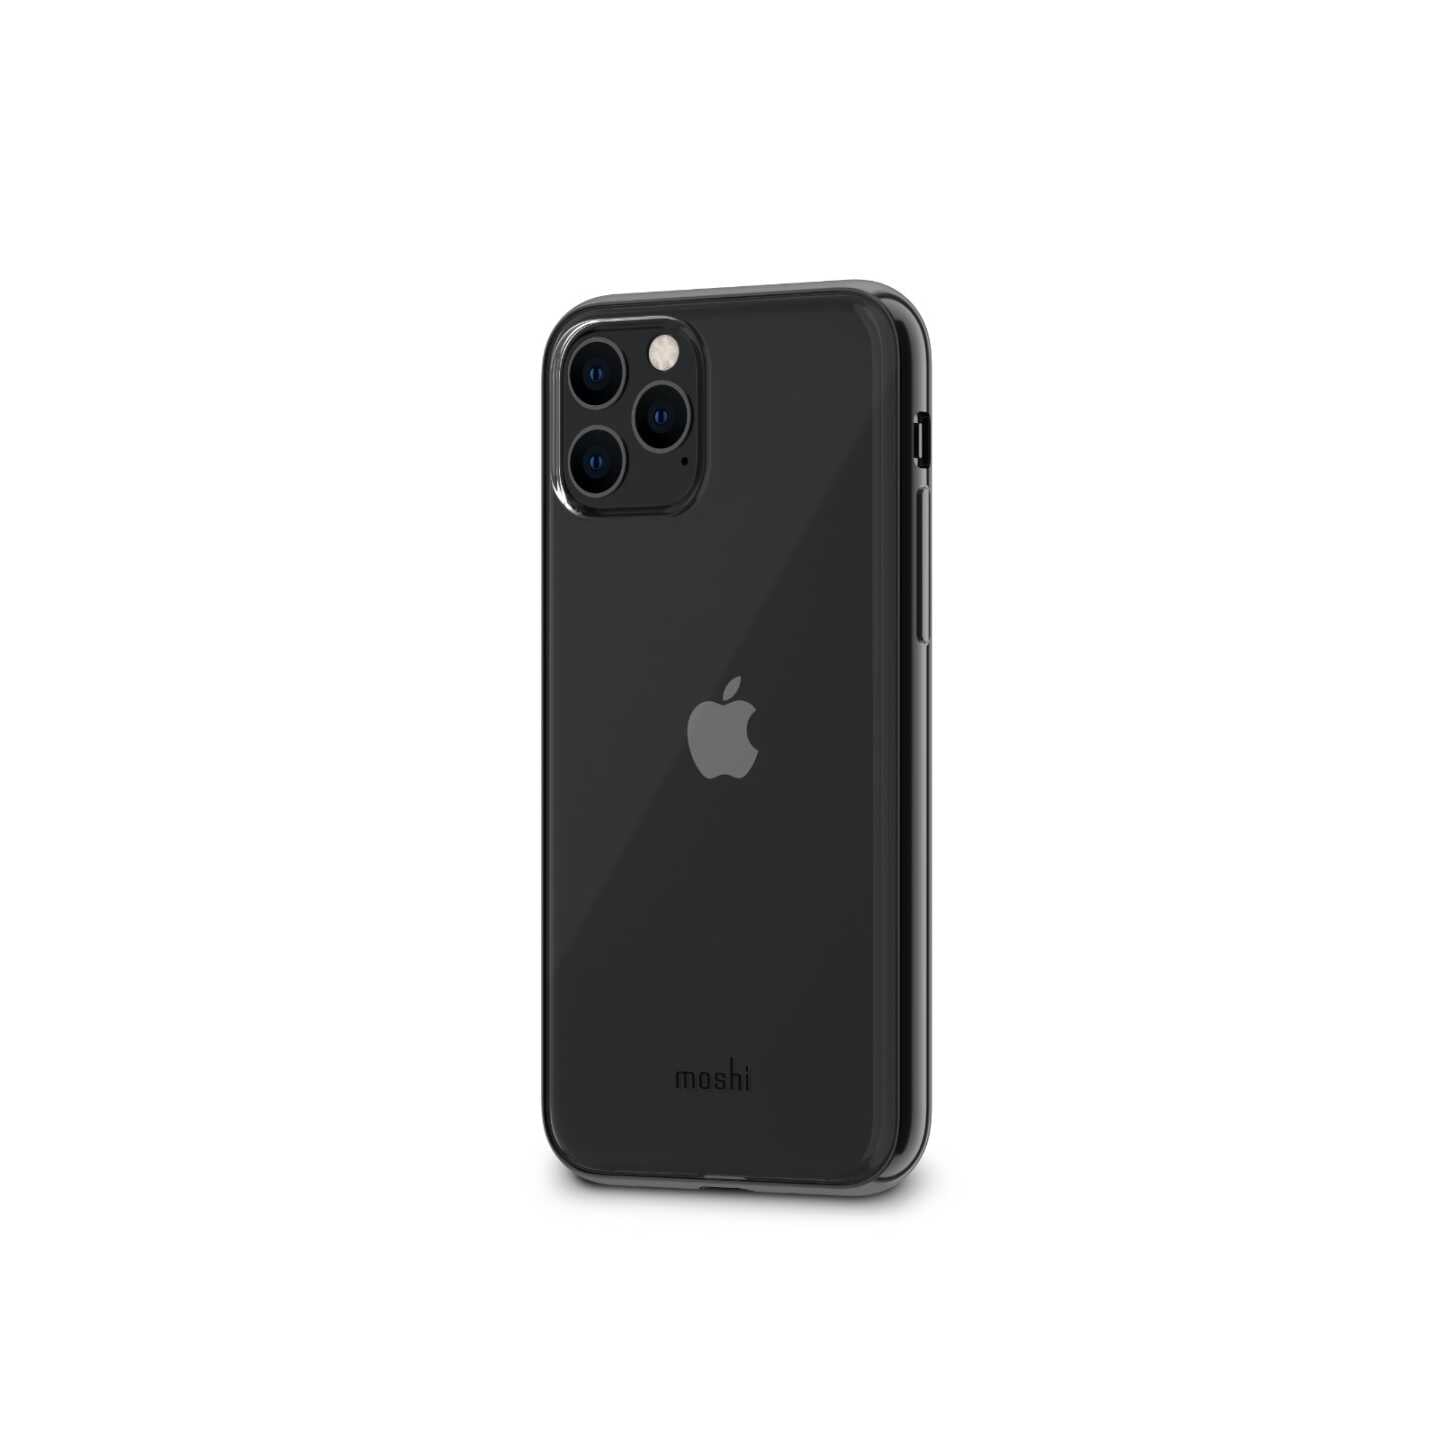 Moshi Vitros Slim Clear Case for iPhone 11 Pro